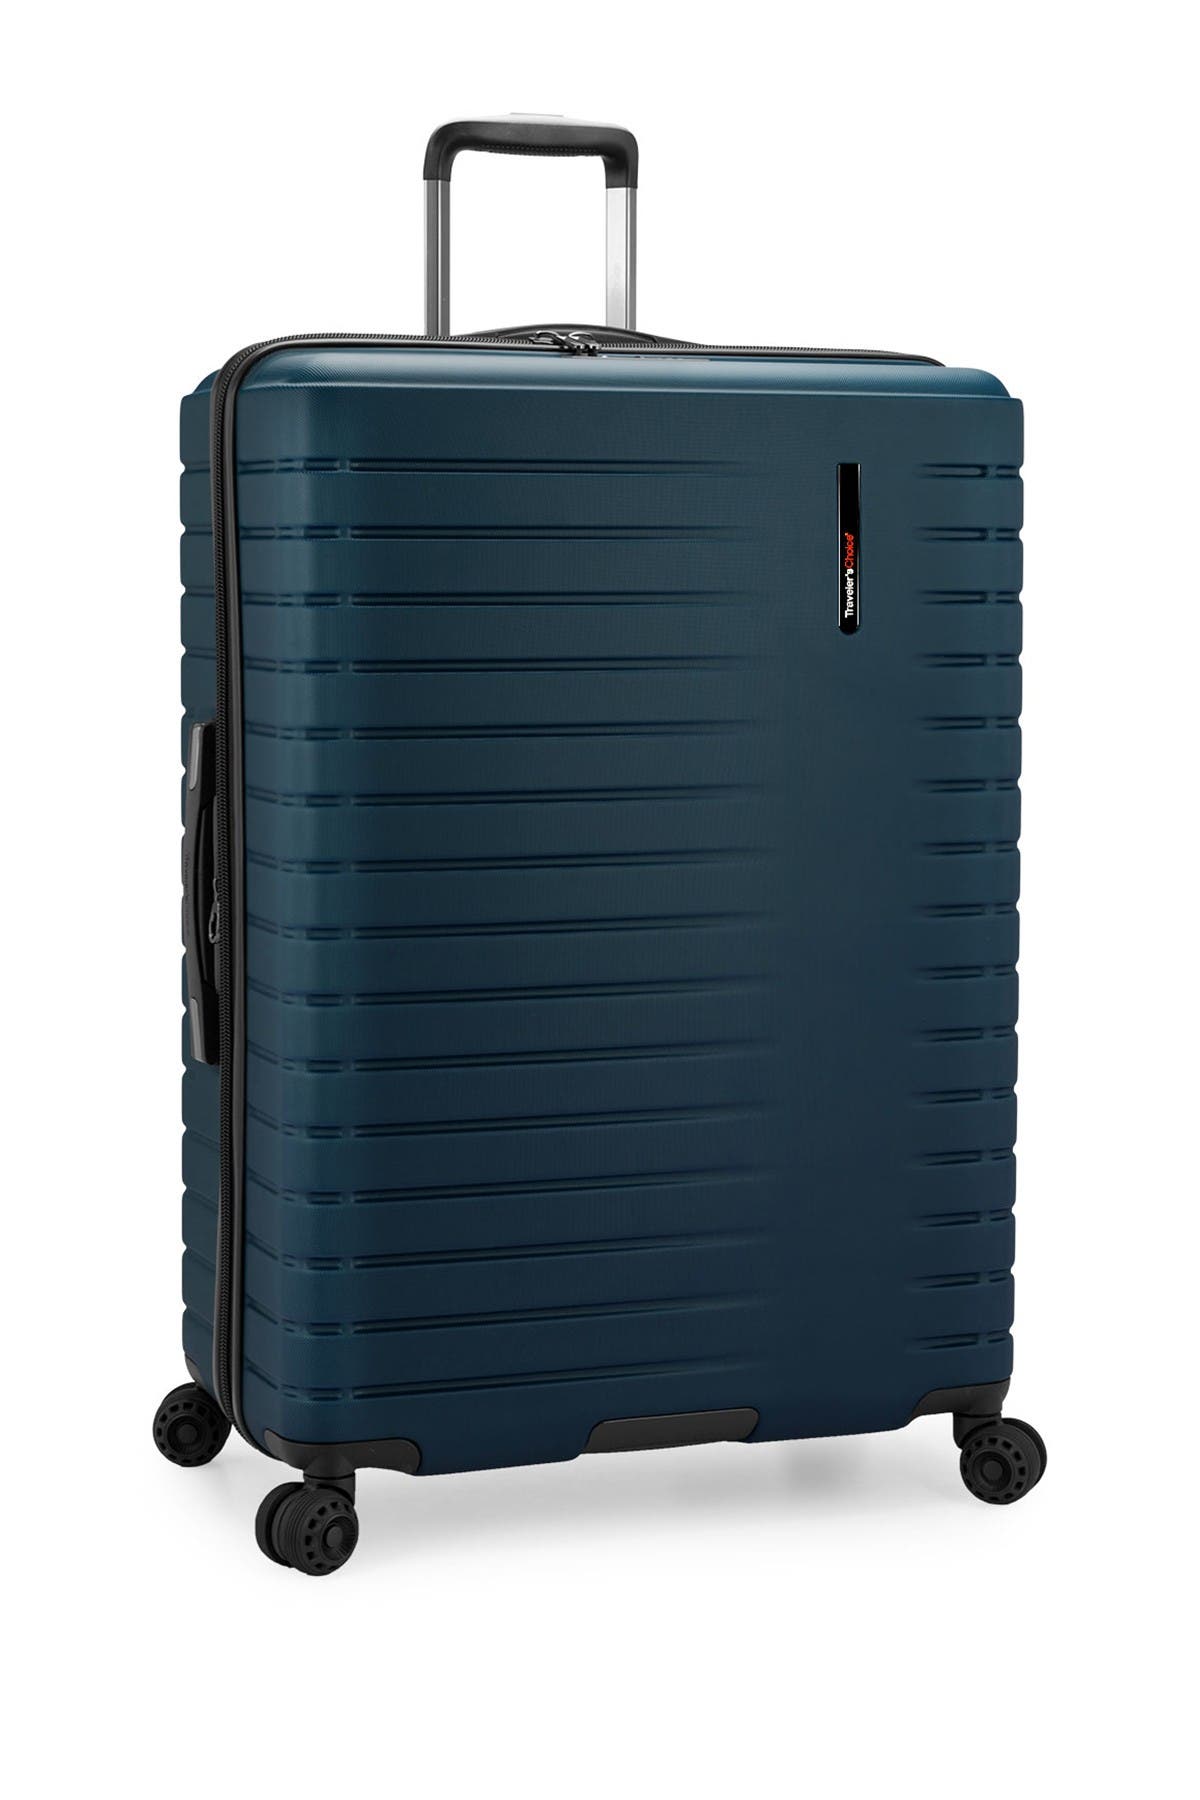 Traveler's Choice Luggage | Castroville 30" Expandable Hardside Spinner